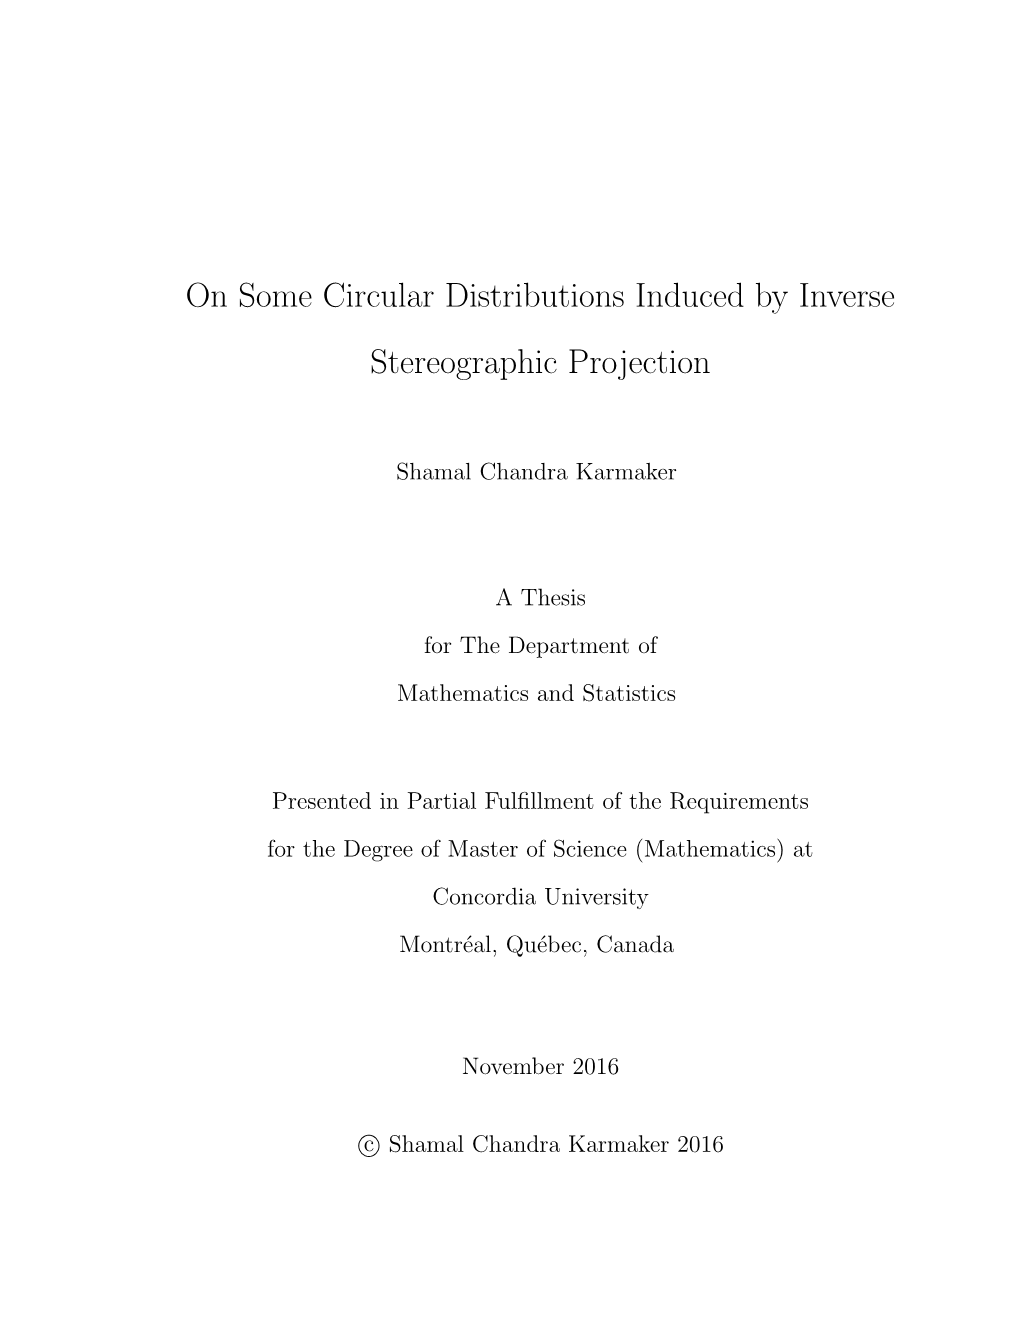 On Some Circular Distributions Induced by Inverse Stereographic Projection